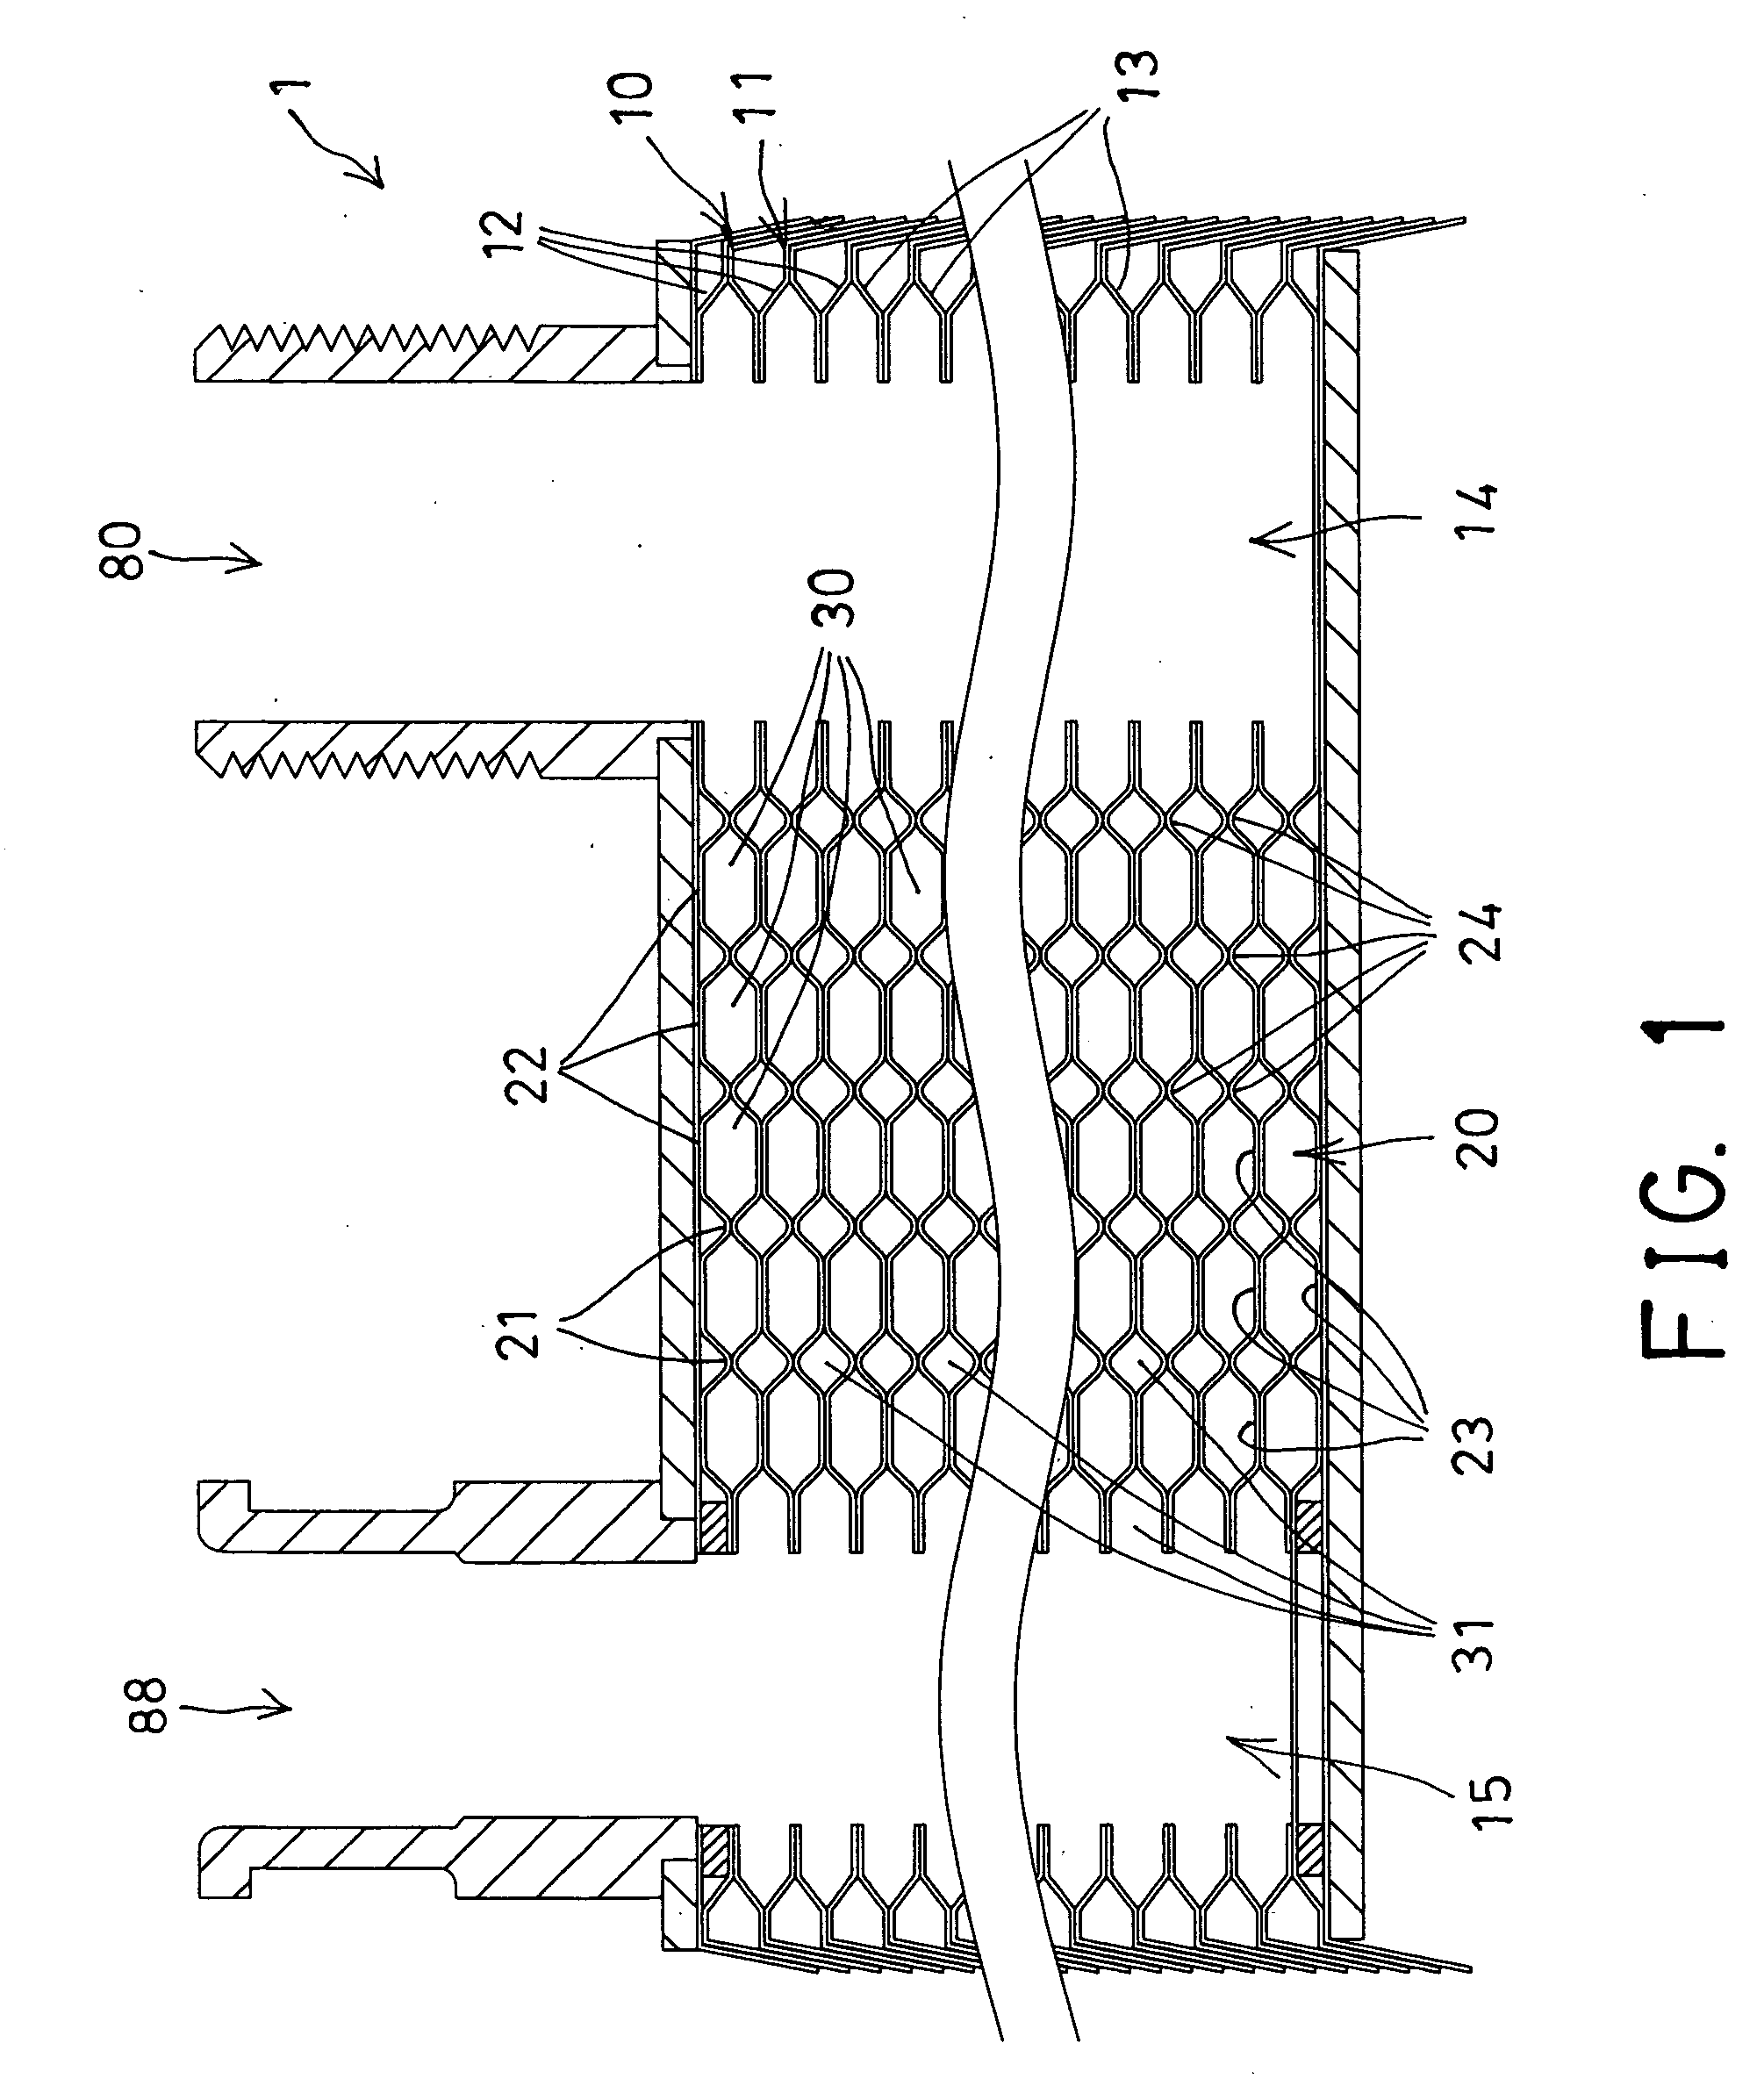 Heat exchanger having different flowing paths